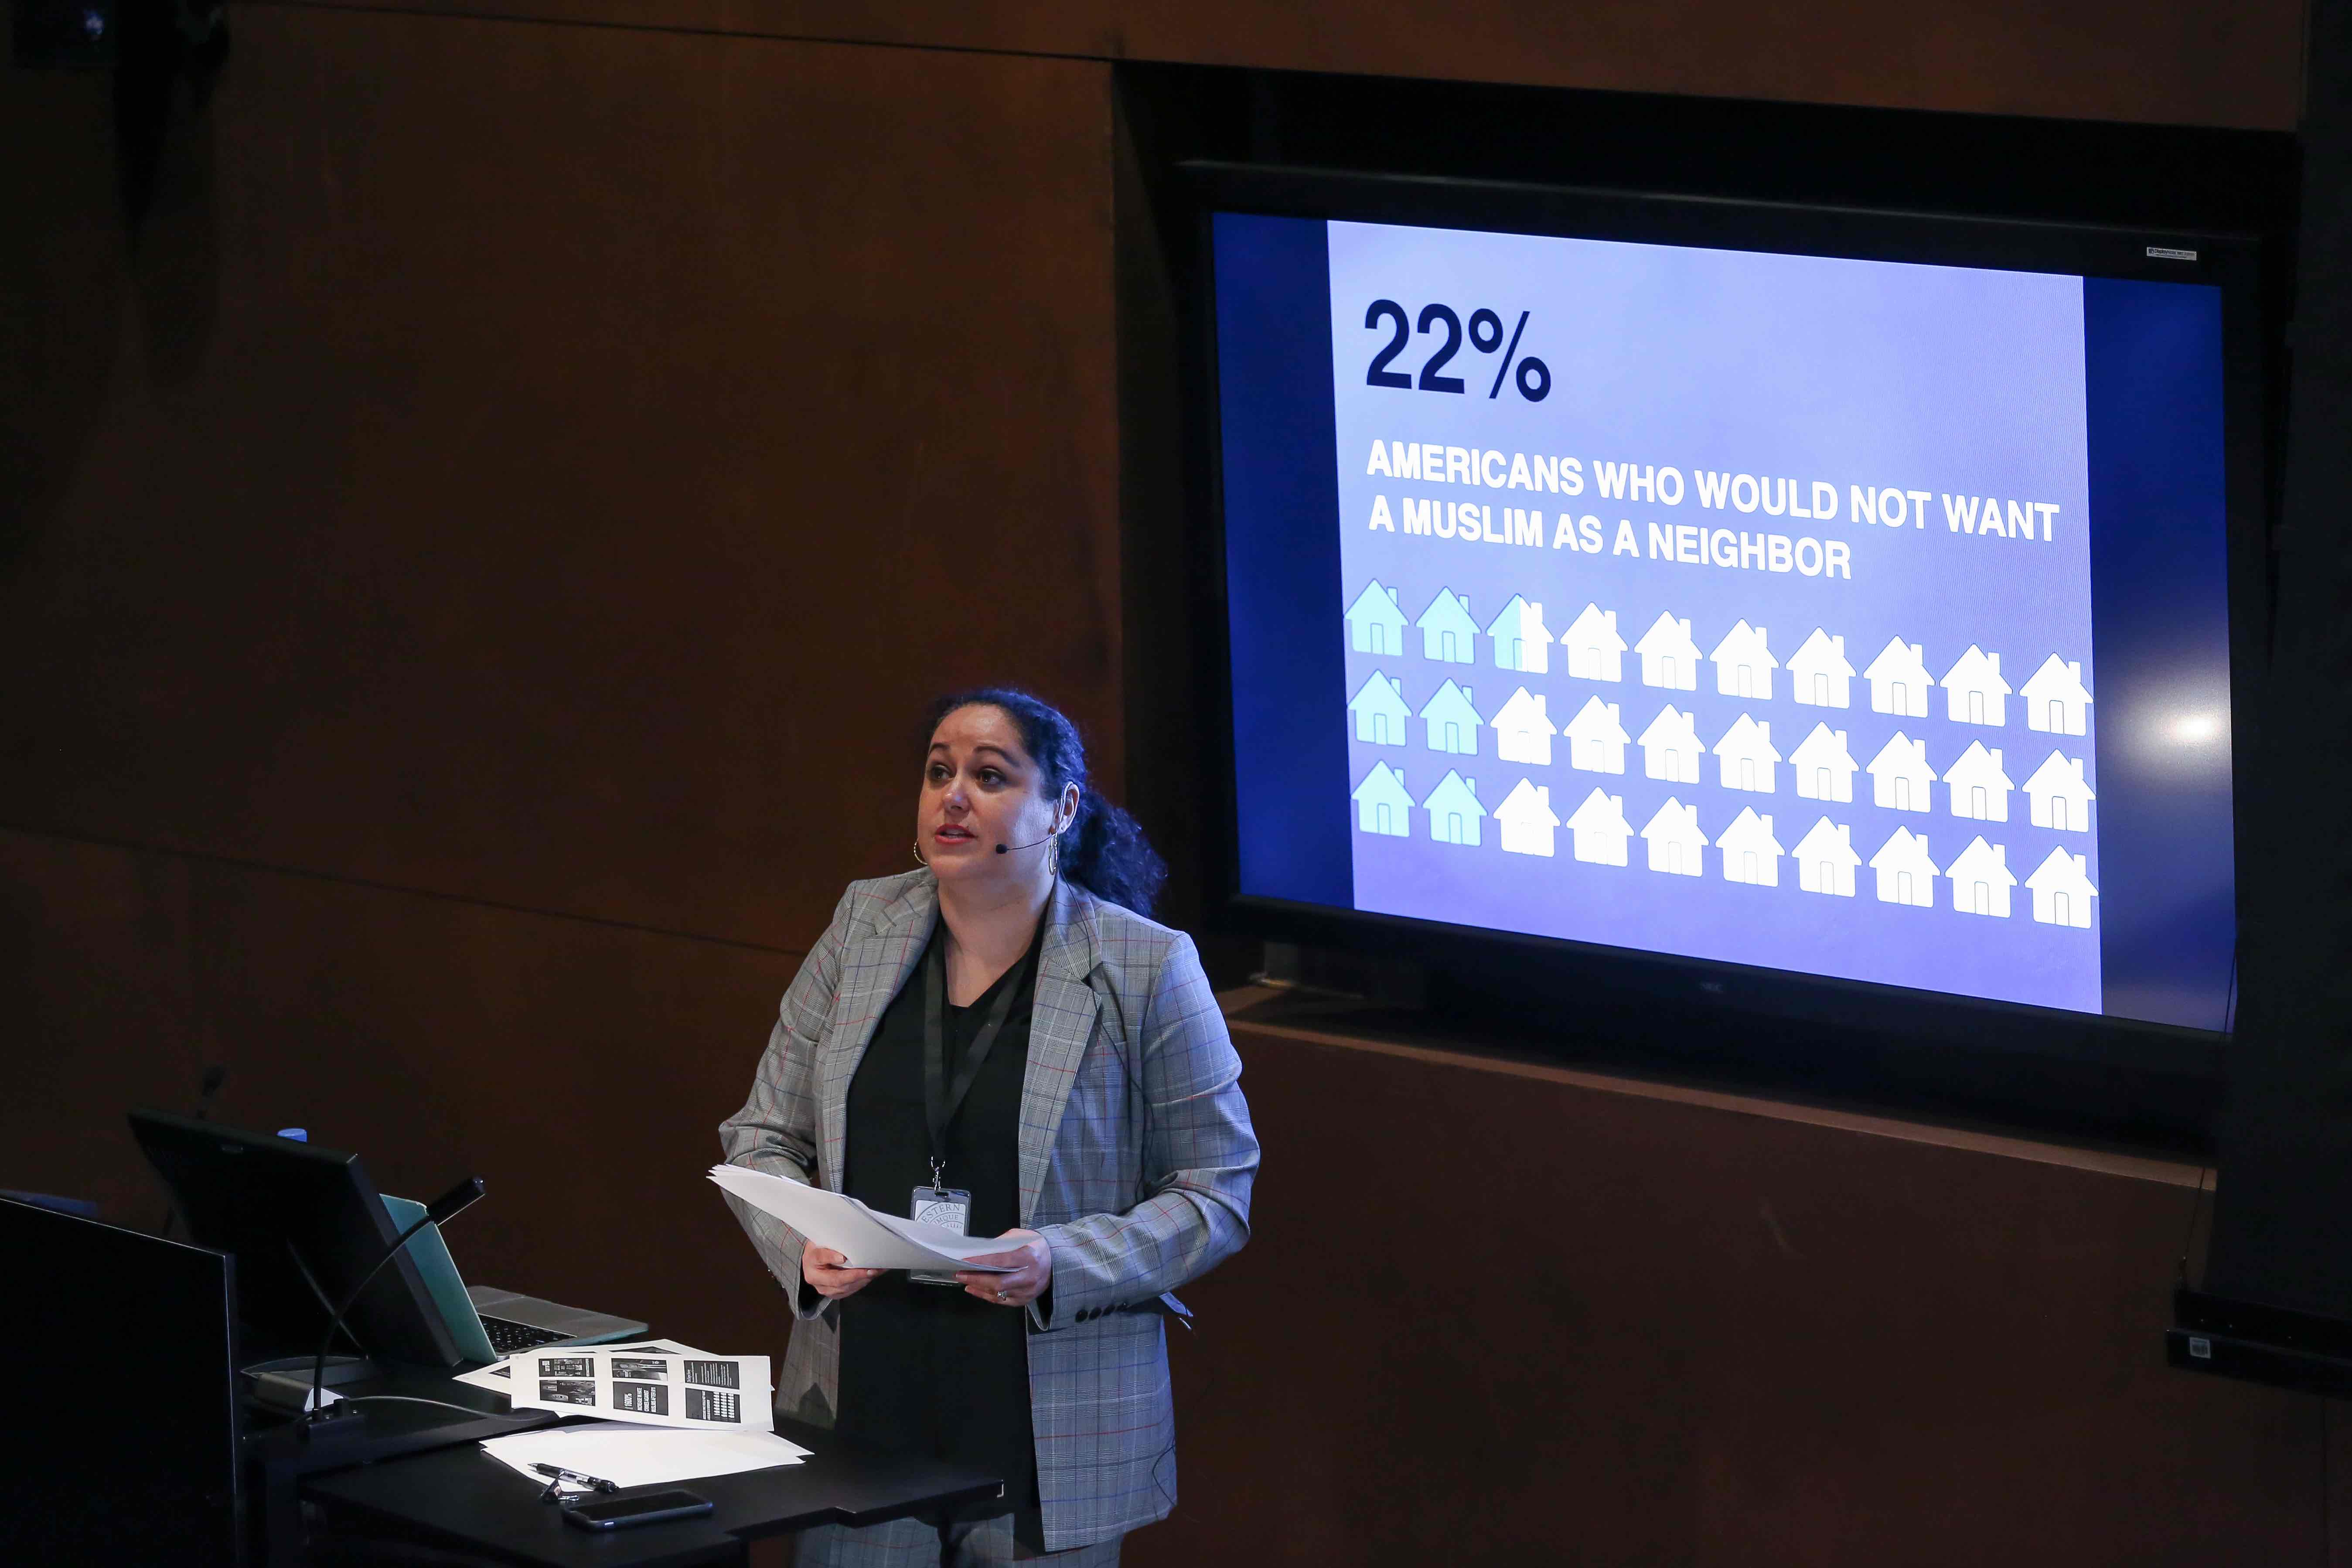 Media scholar Evelyn Alsultany spoke at NU-Q about the implications of biased representation of Arabs and Muslims in American films. 